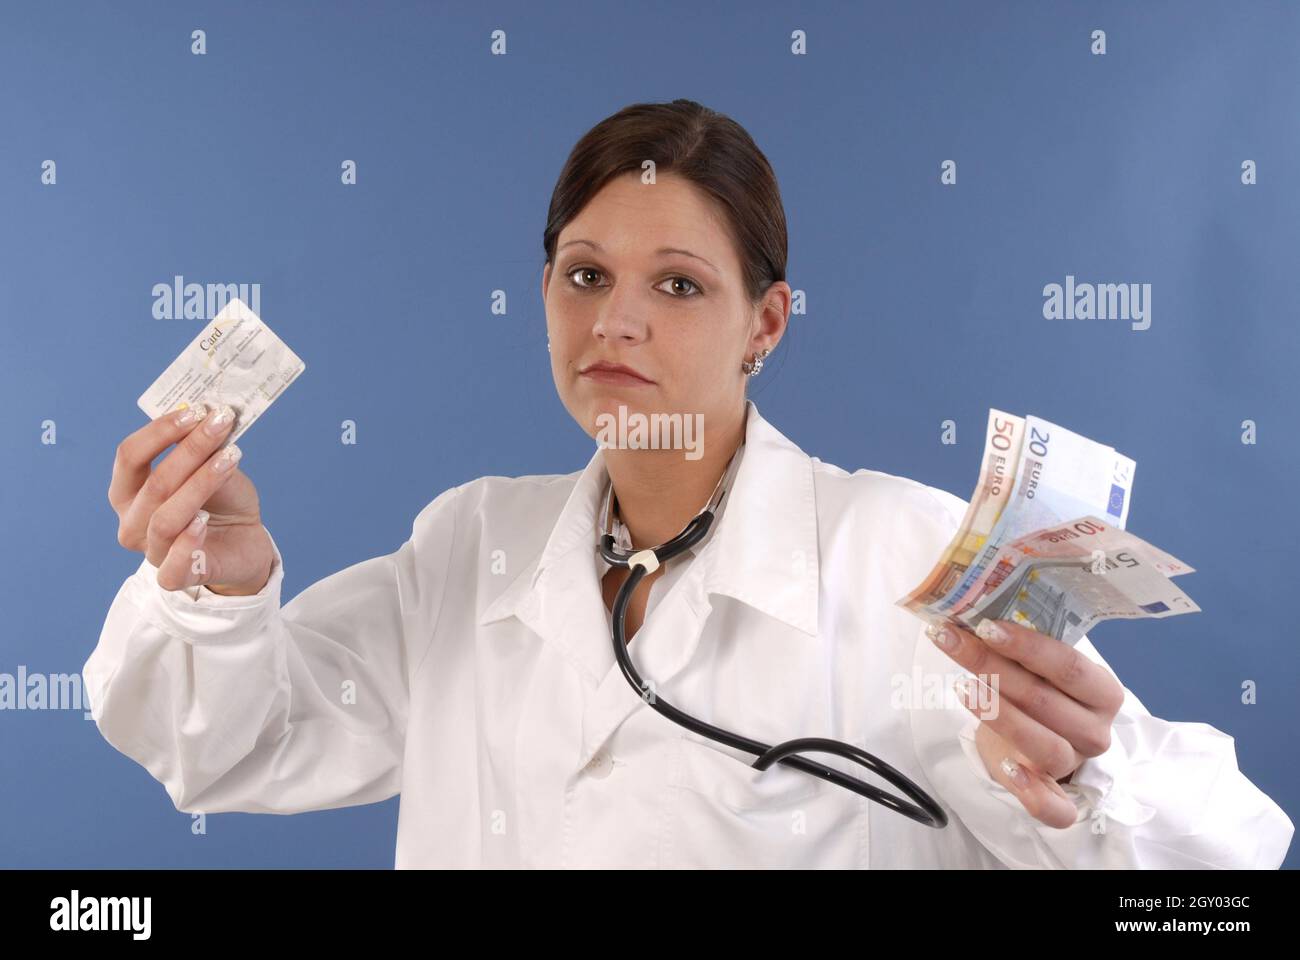 shrugging shoulders young female doctor with stethoscope shows money and health insurance card Stock Photo